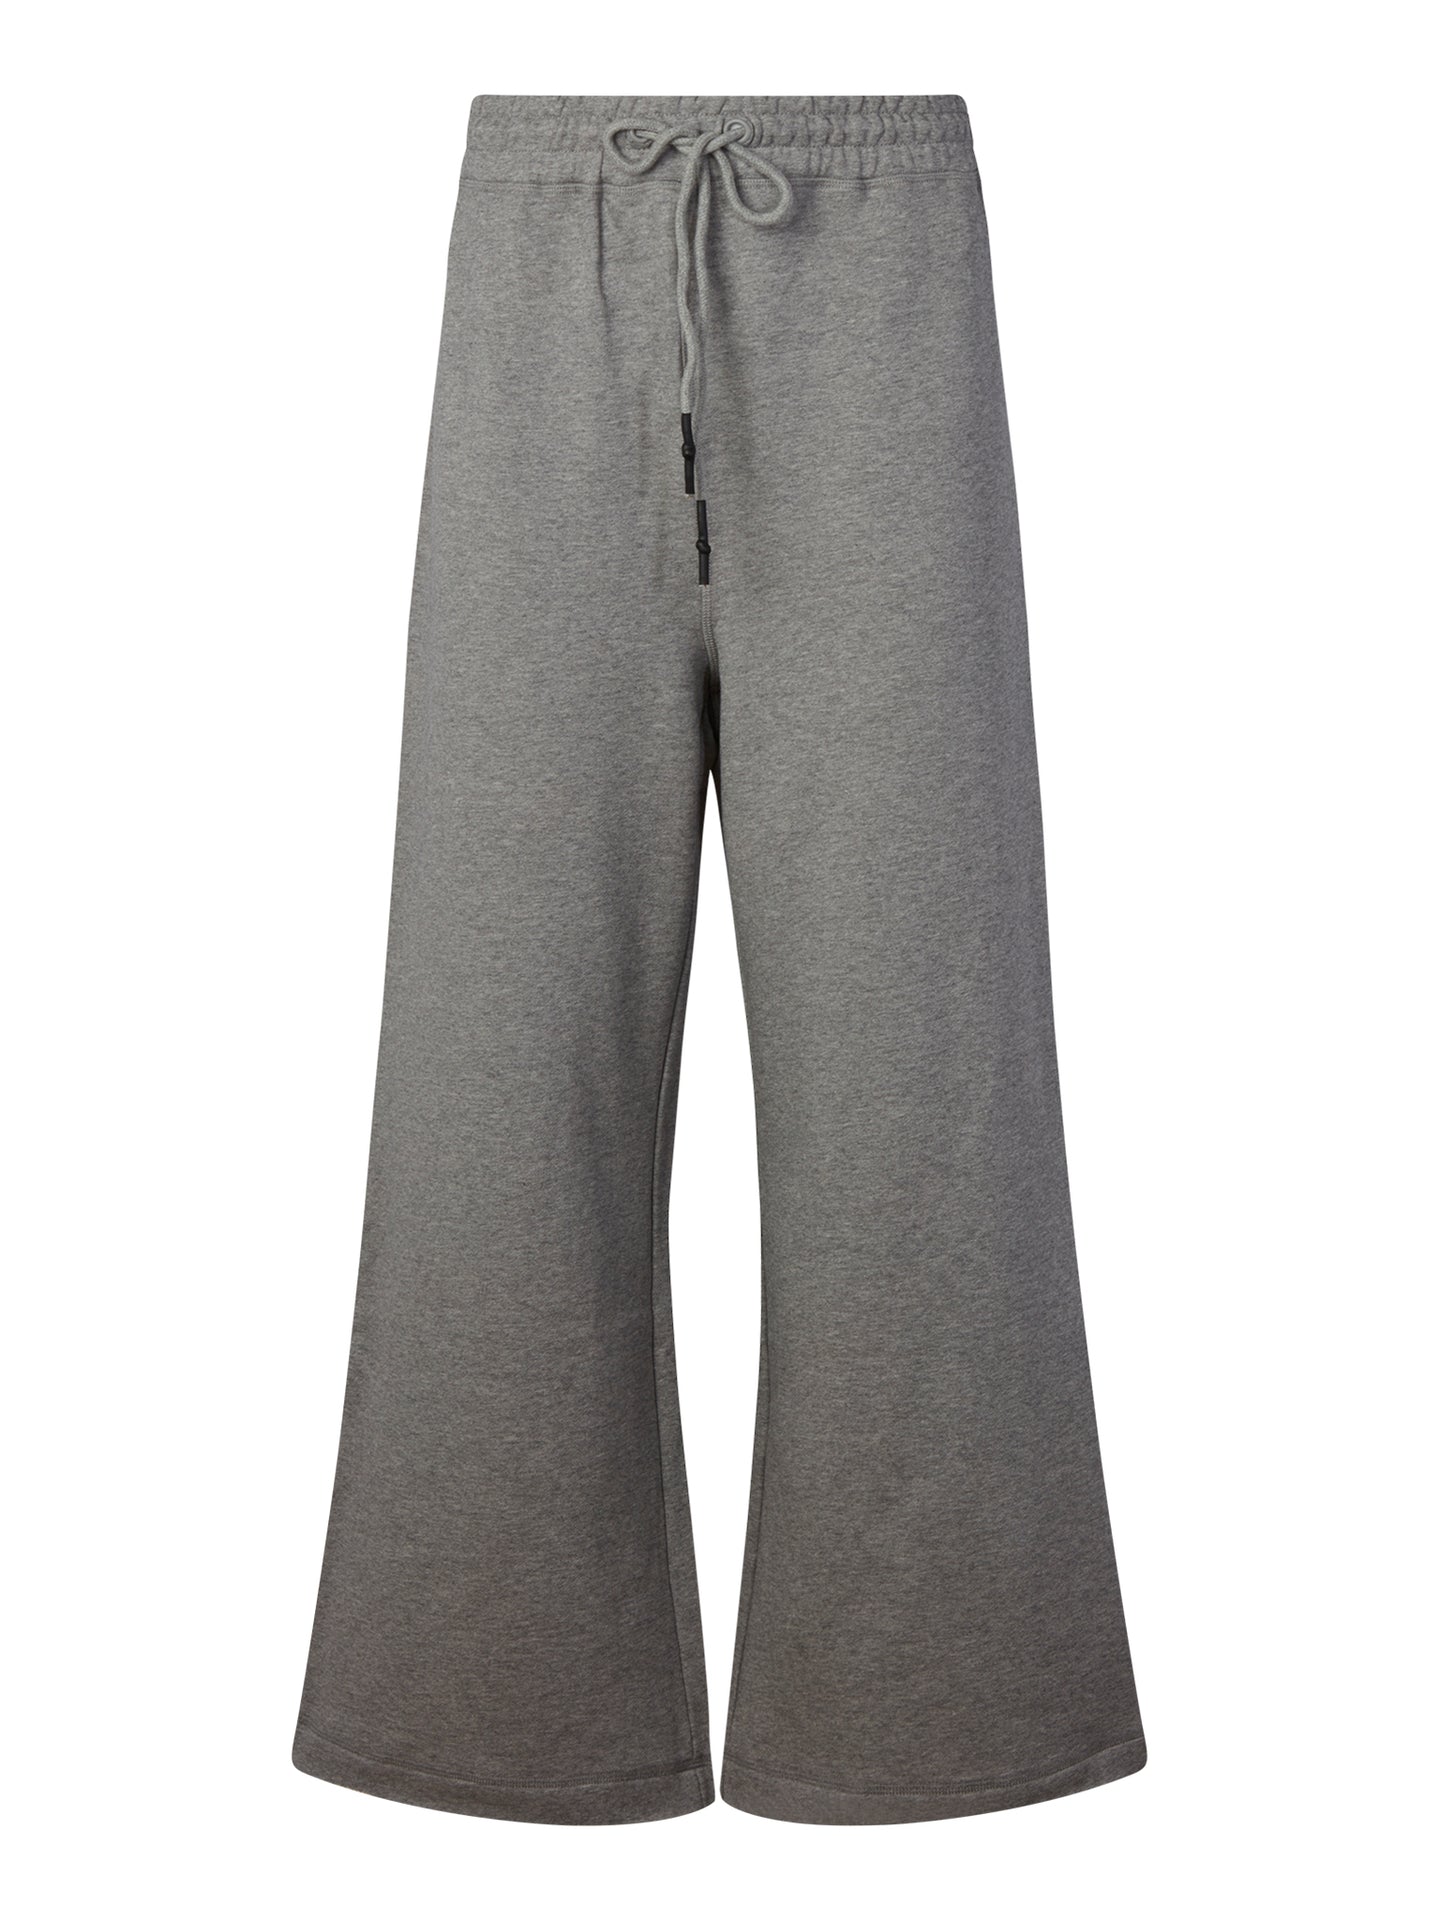 03 FRENCH TERRY WIDE LEG SWEATPANT